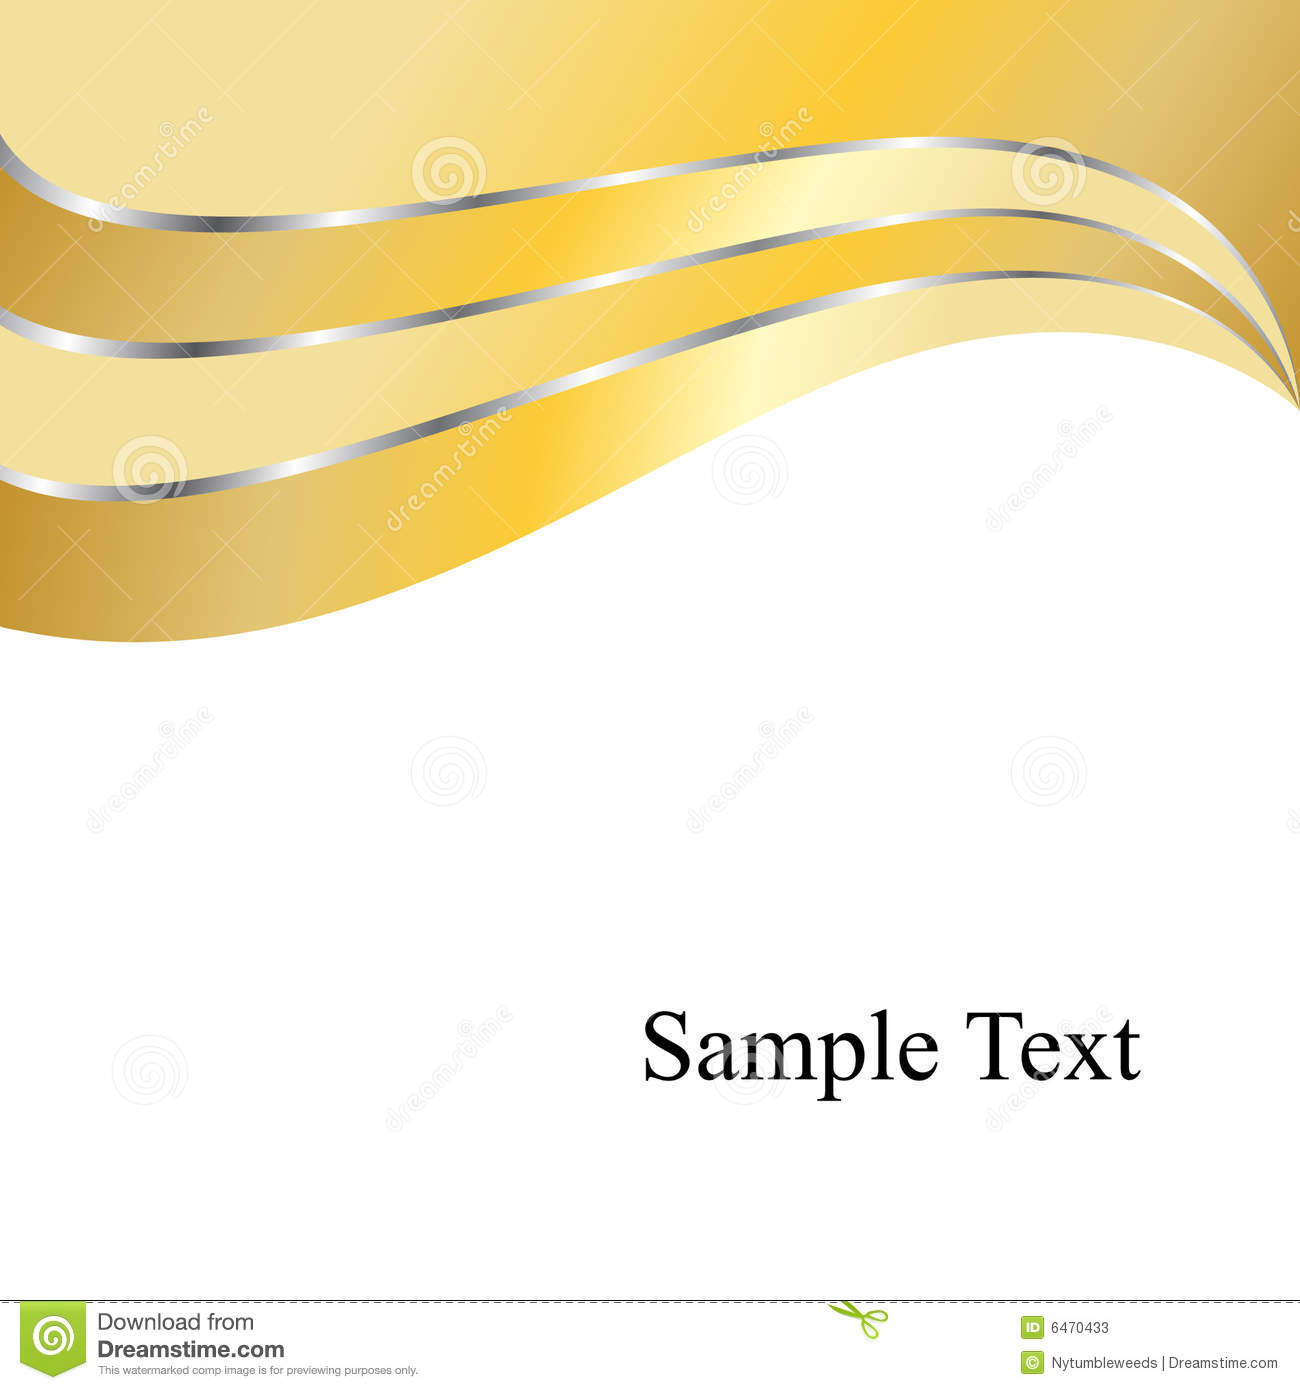 Blue and Gold Vector Swirl Clip Art